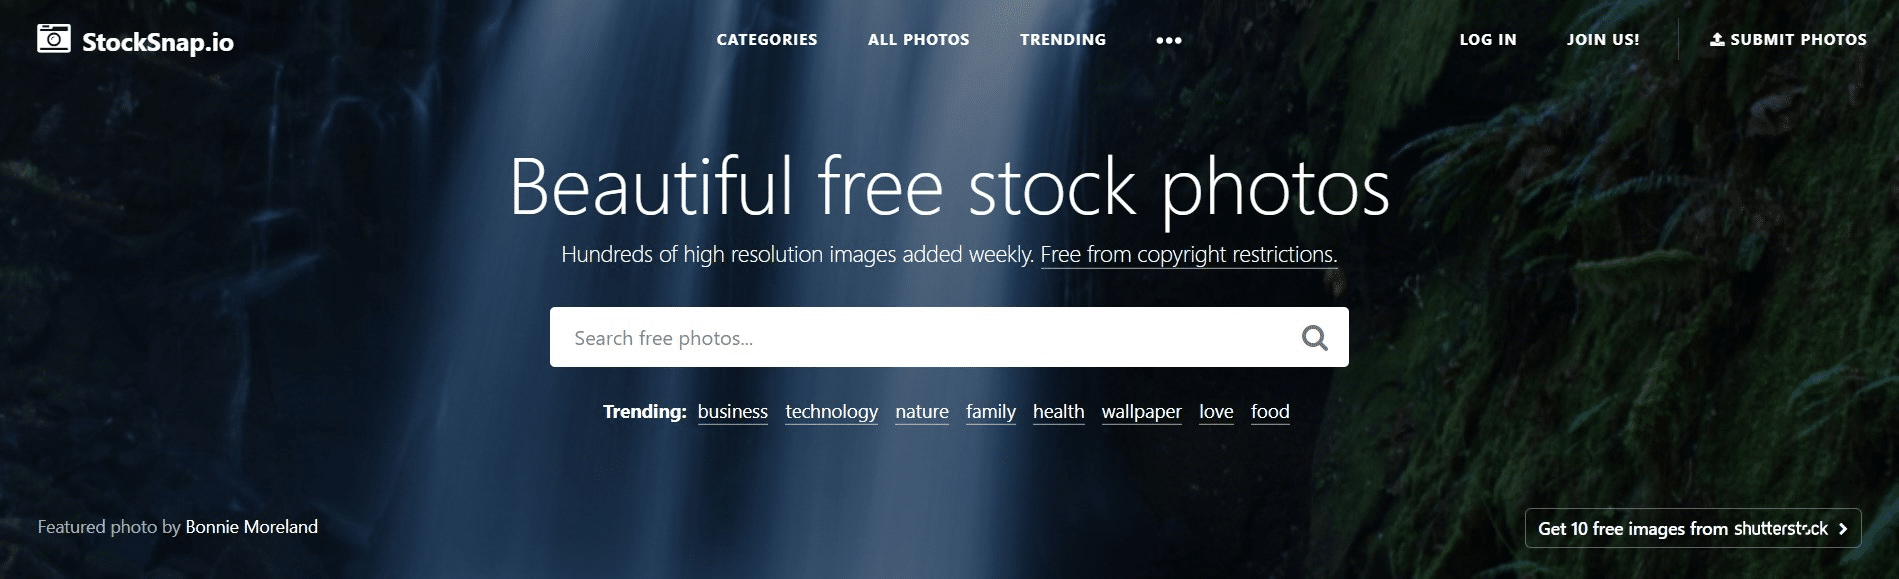 Stocksnap.io free images for website.